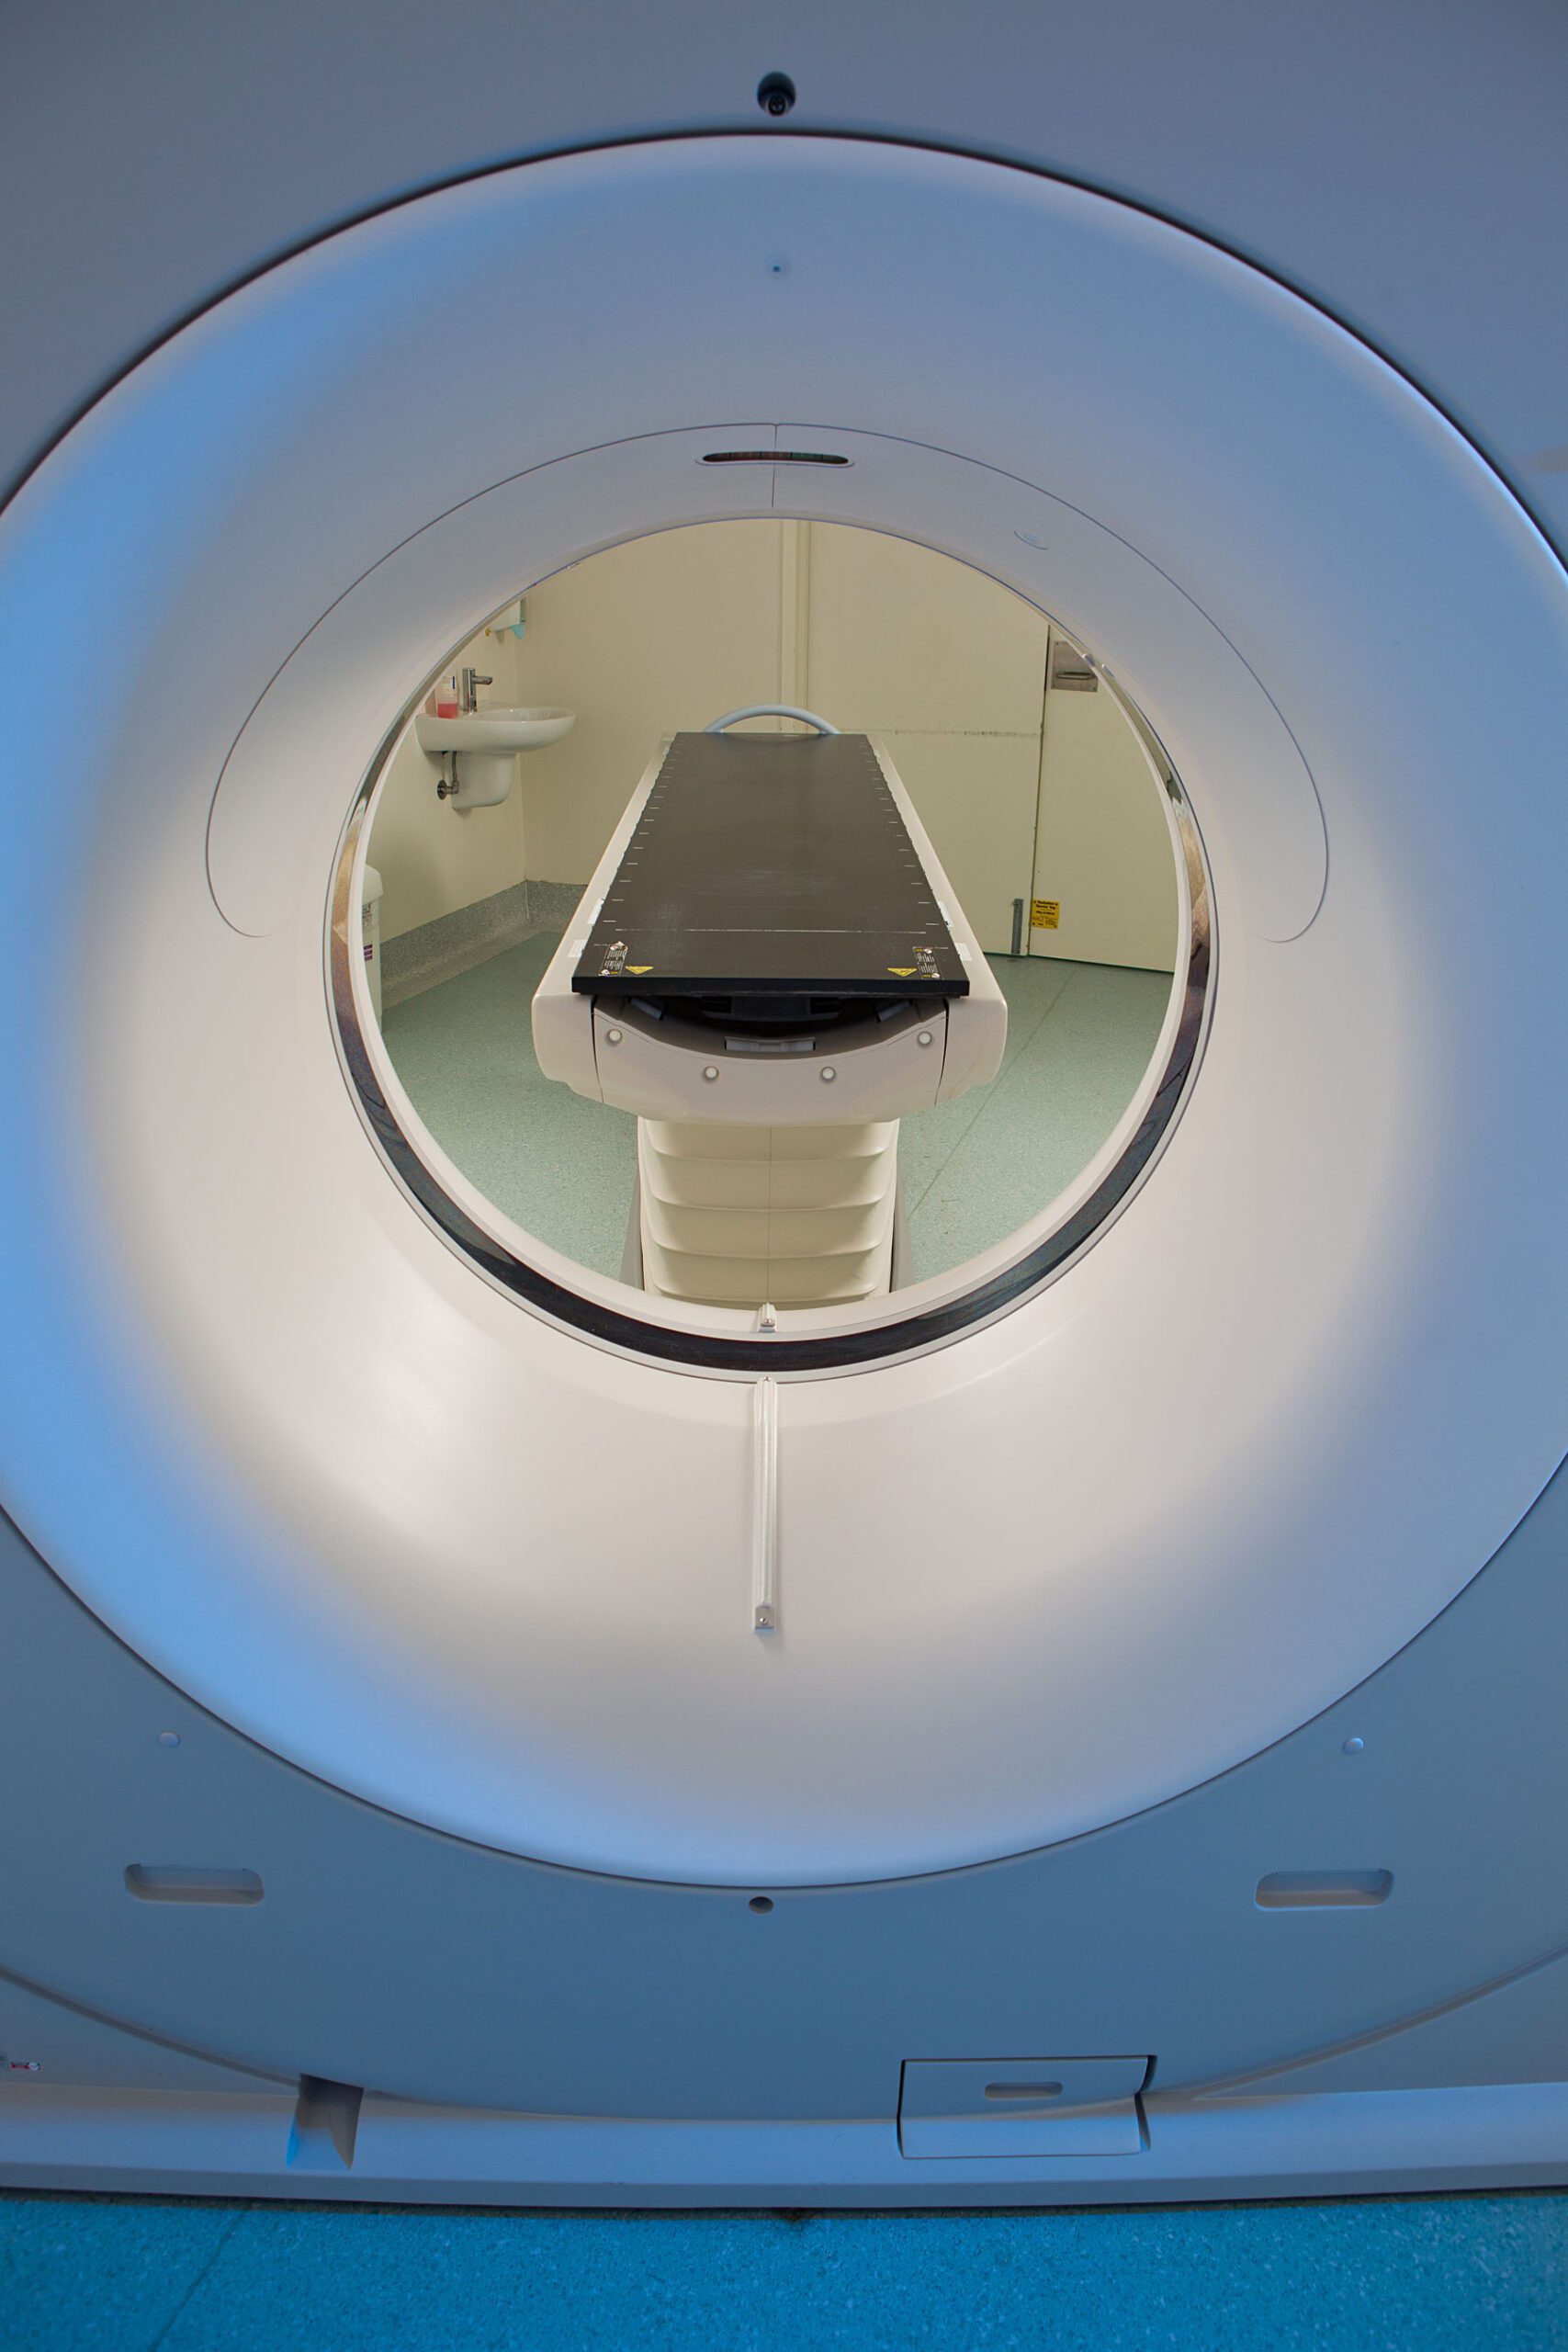 An in depth look at the importance of CT scanning in the Forensic Medicine service